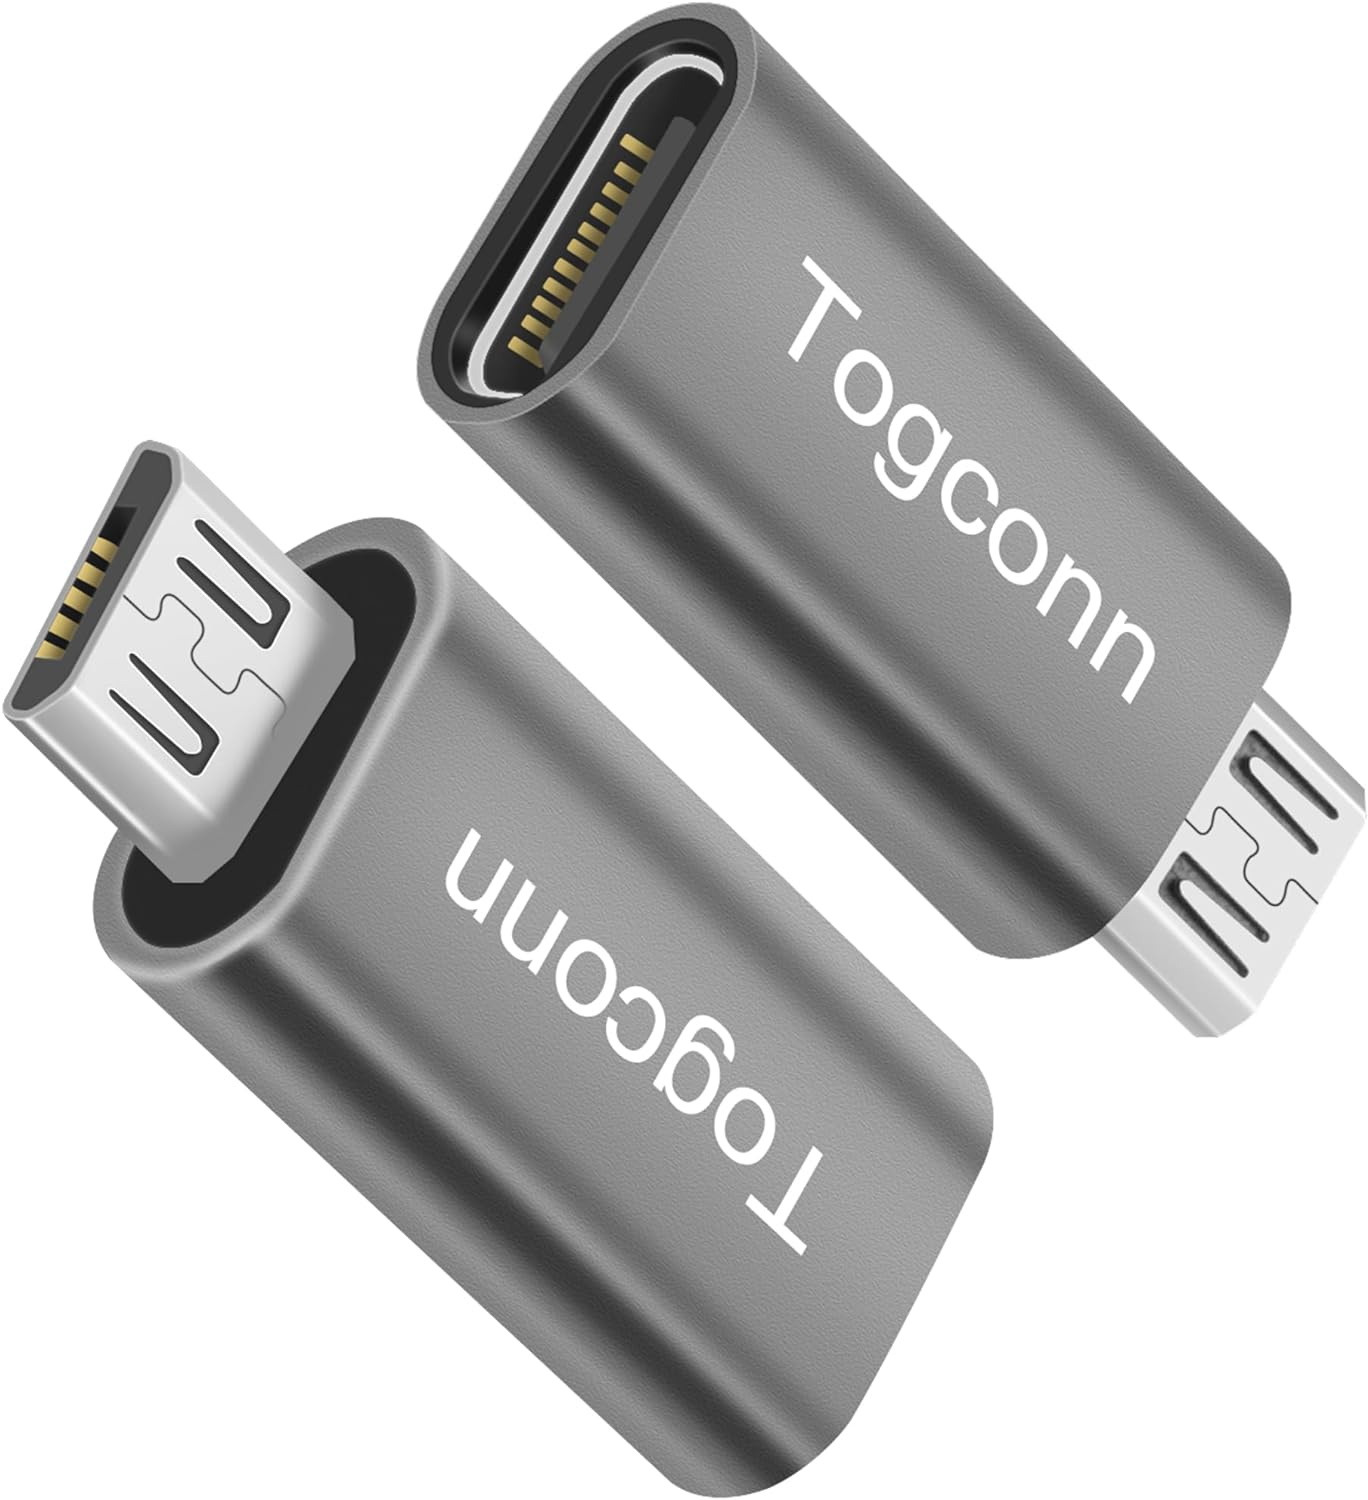 MICRO USB to USB-C adapter, Adapters and Accessories